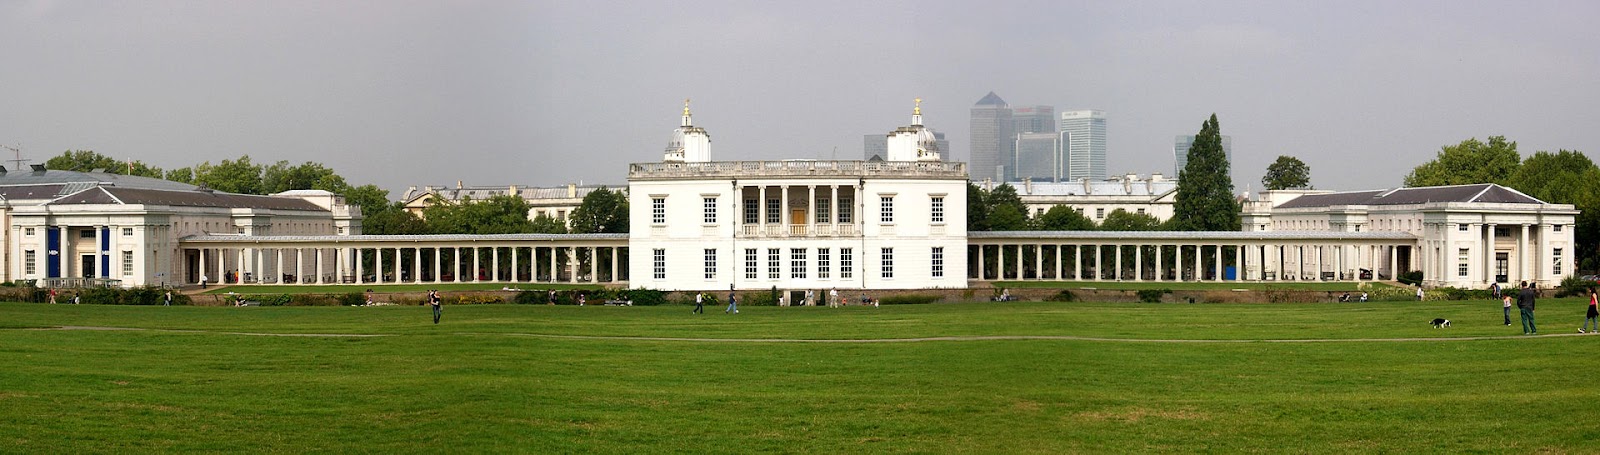 Queen's_house_from_the_South.jpg